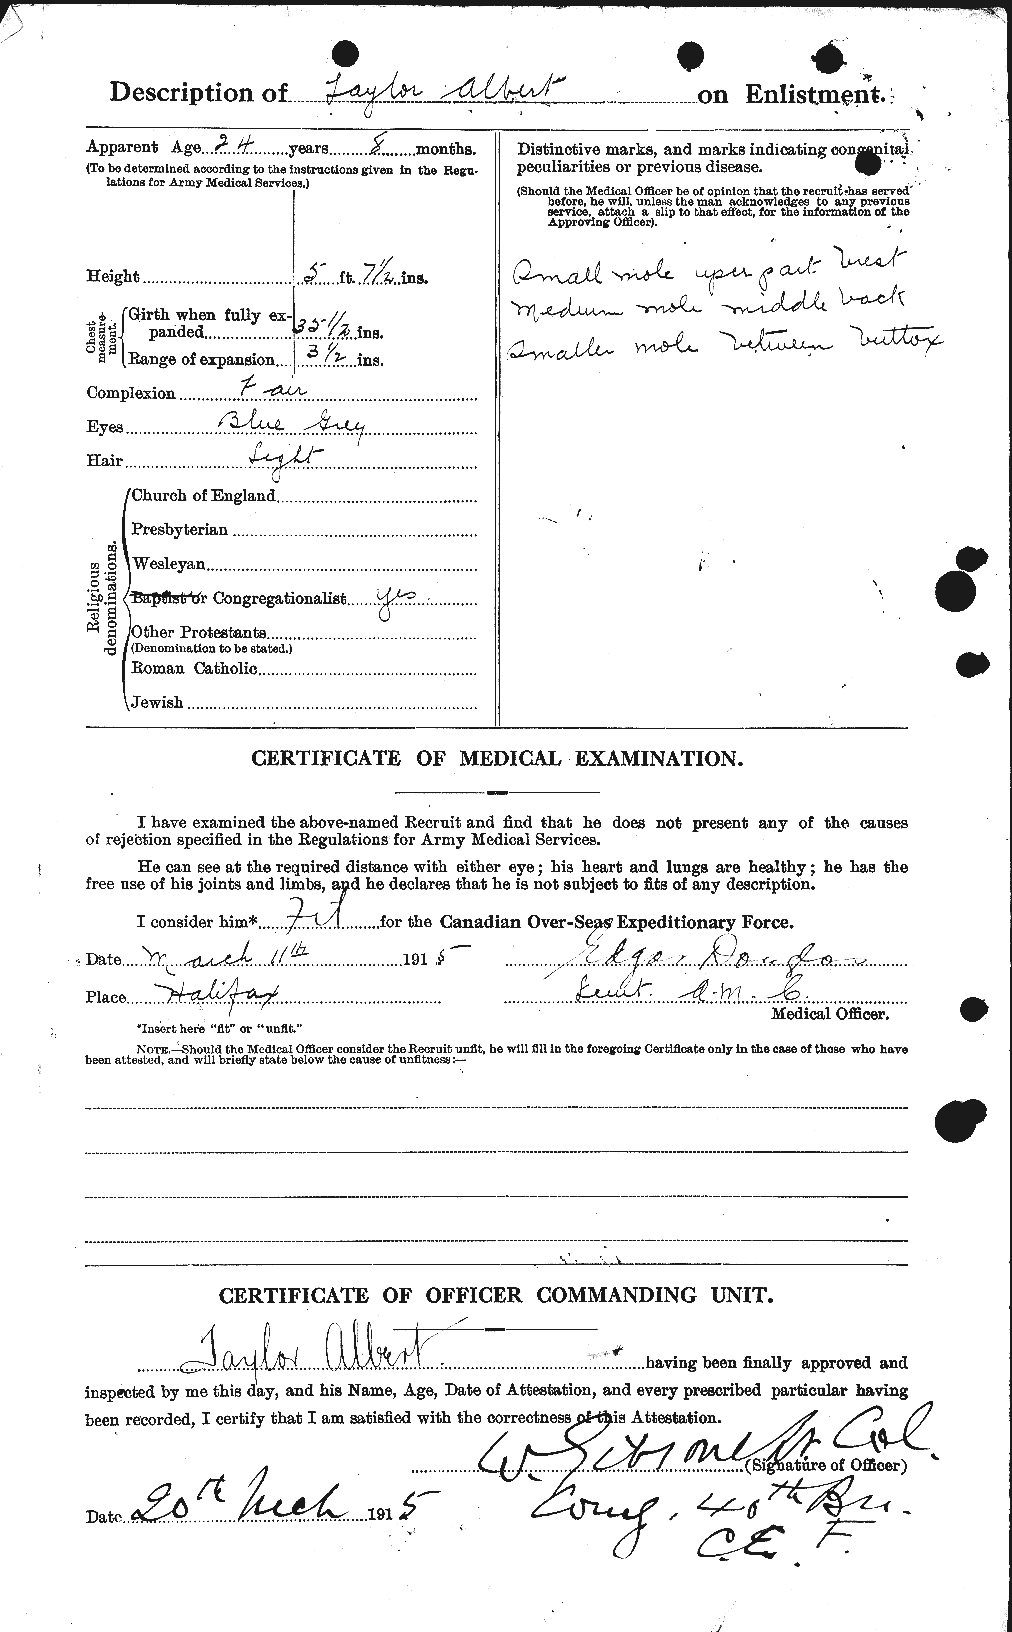 Personnel Records of the First World War - CEF 626103b